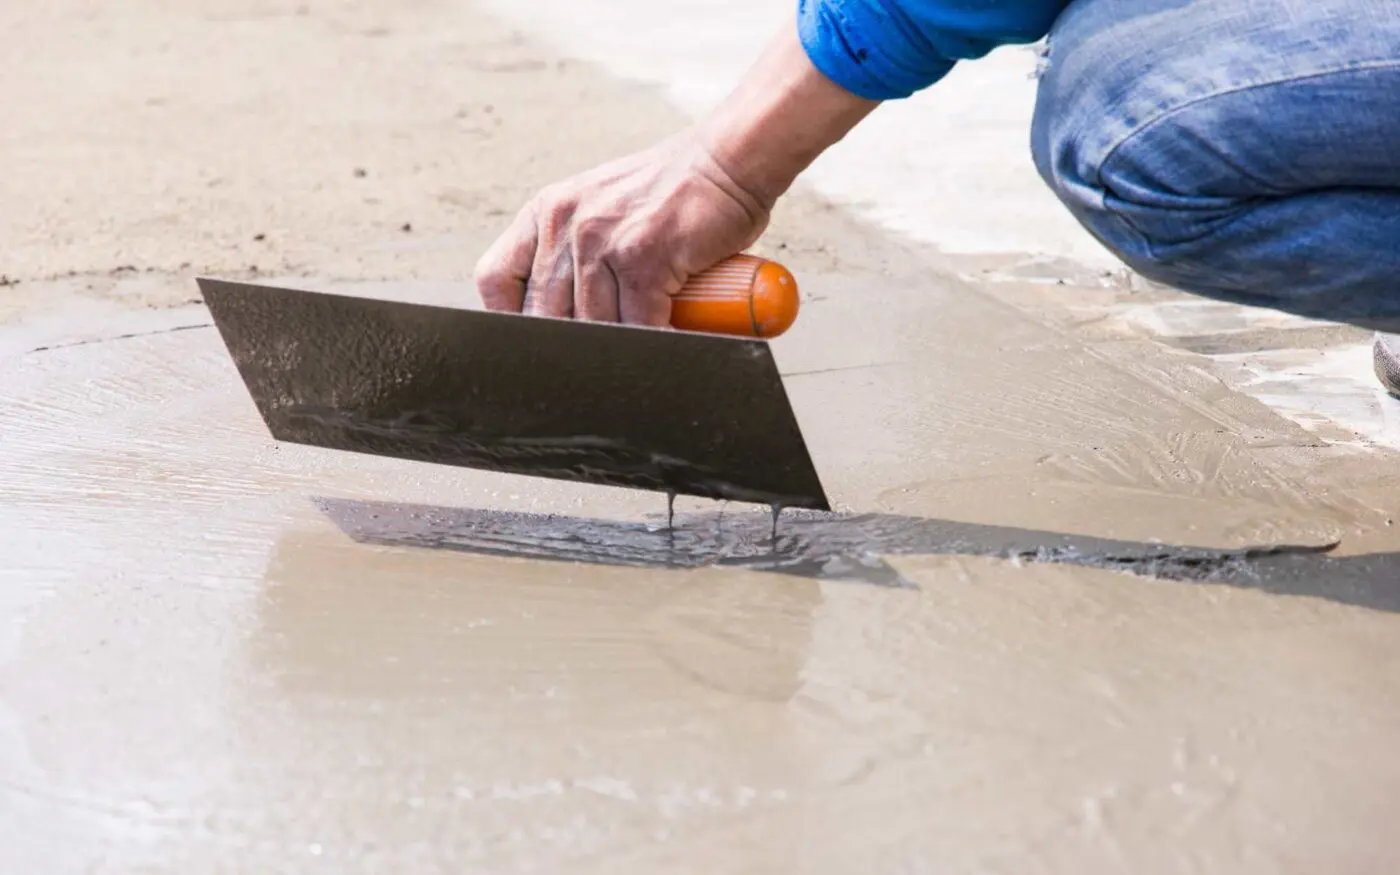 A close-up of a person using a trowel to smooth out a freshly laid cement surface. The worker, wearing a blue shirt, is in a kneeling position and firmly holding the trowel with an orange handle, ensuring an even and smooth finish on the wet cement—showcasing Reno Concrete Solutions' quality concrete work in NV.